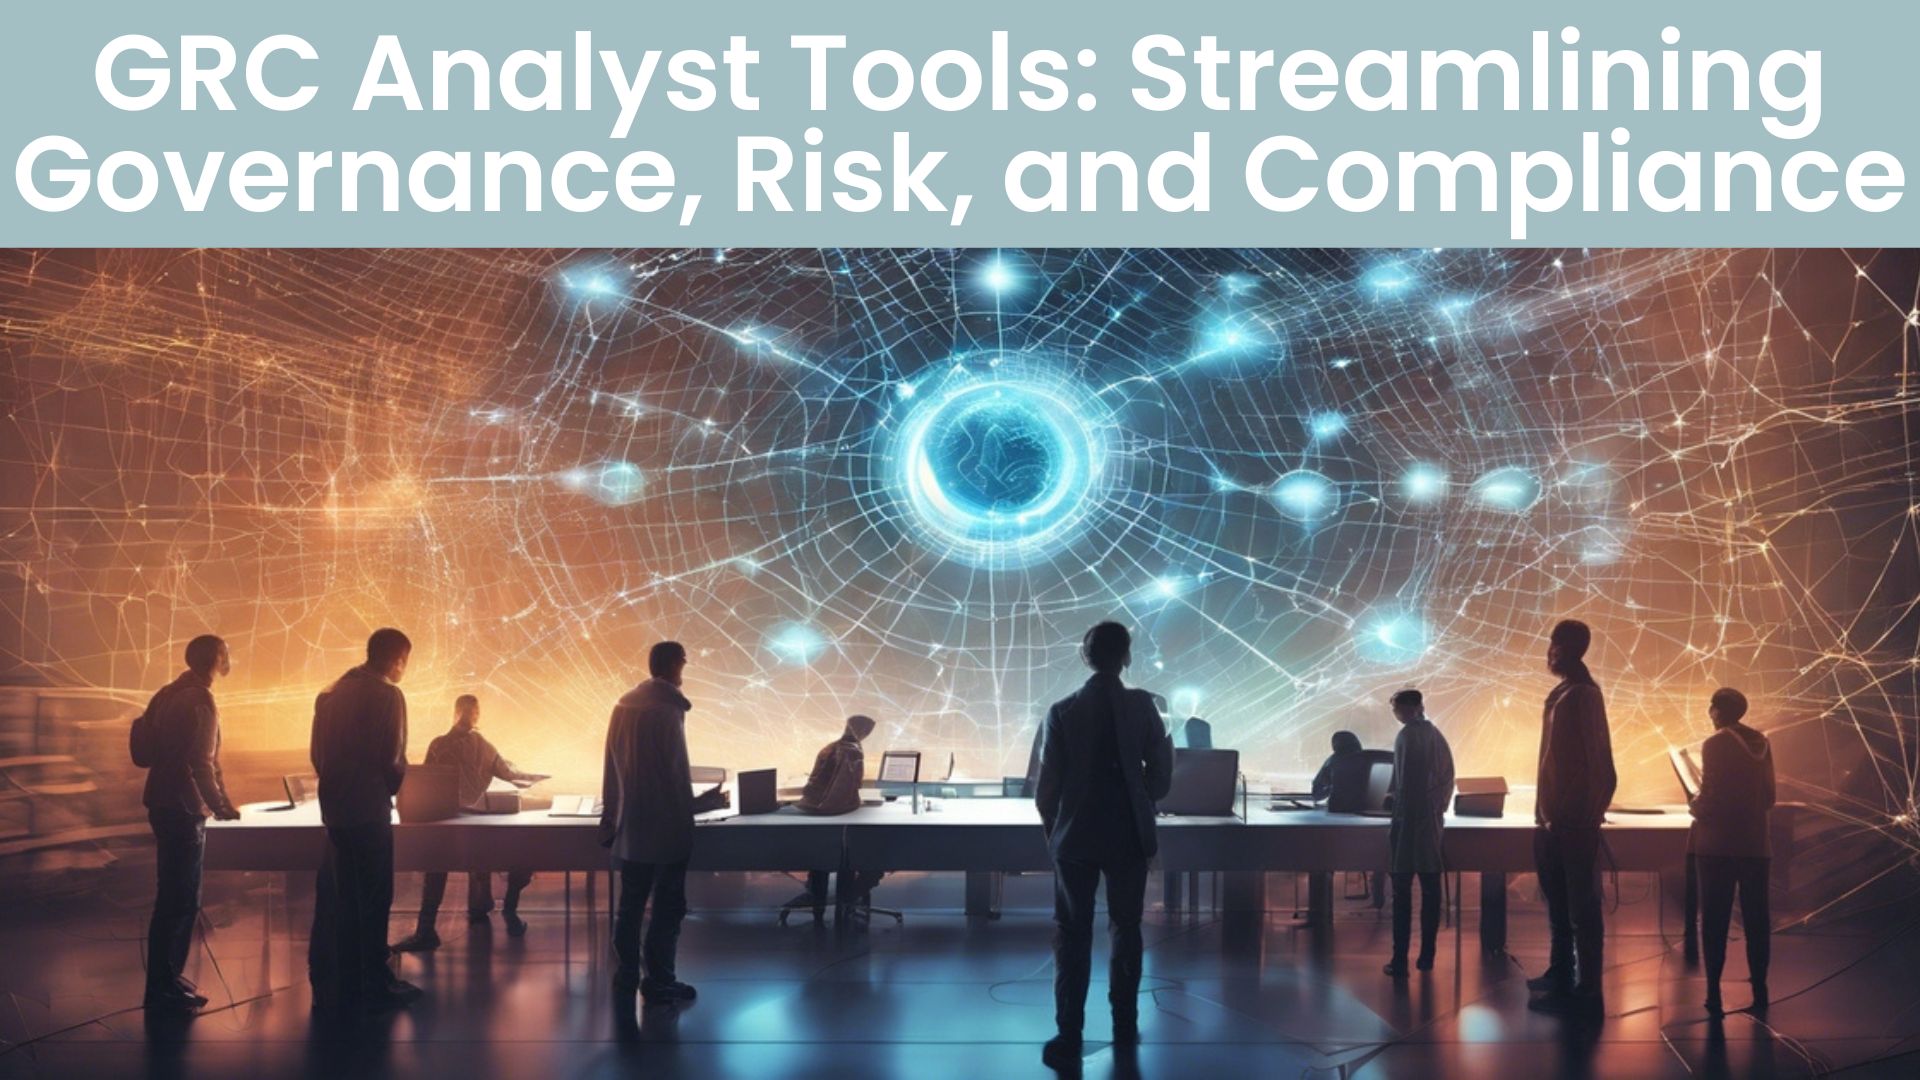 GRC Analyst Tools Streamlining Governance, Risk, and Compliance